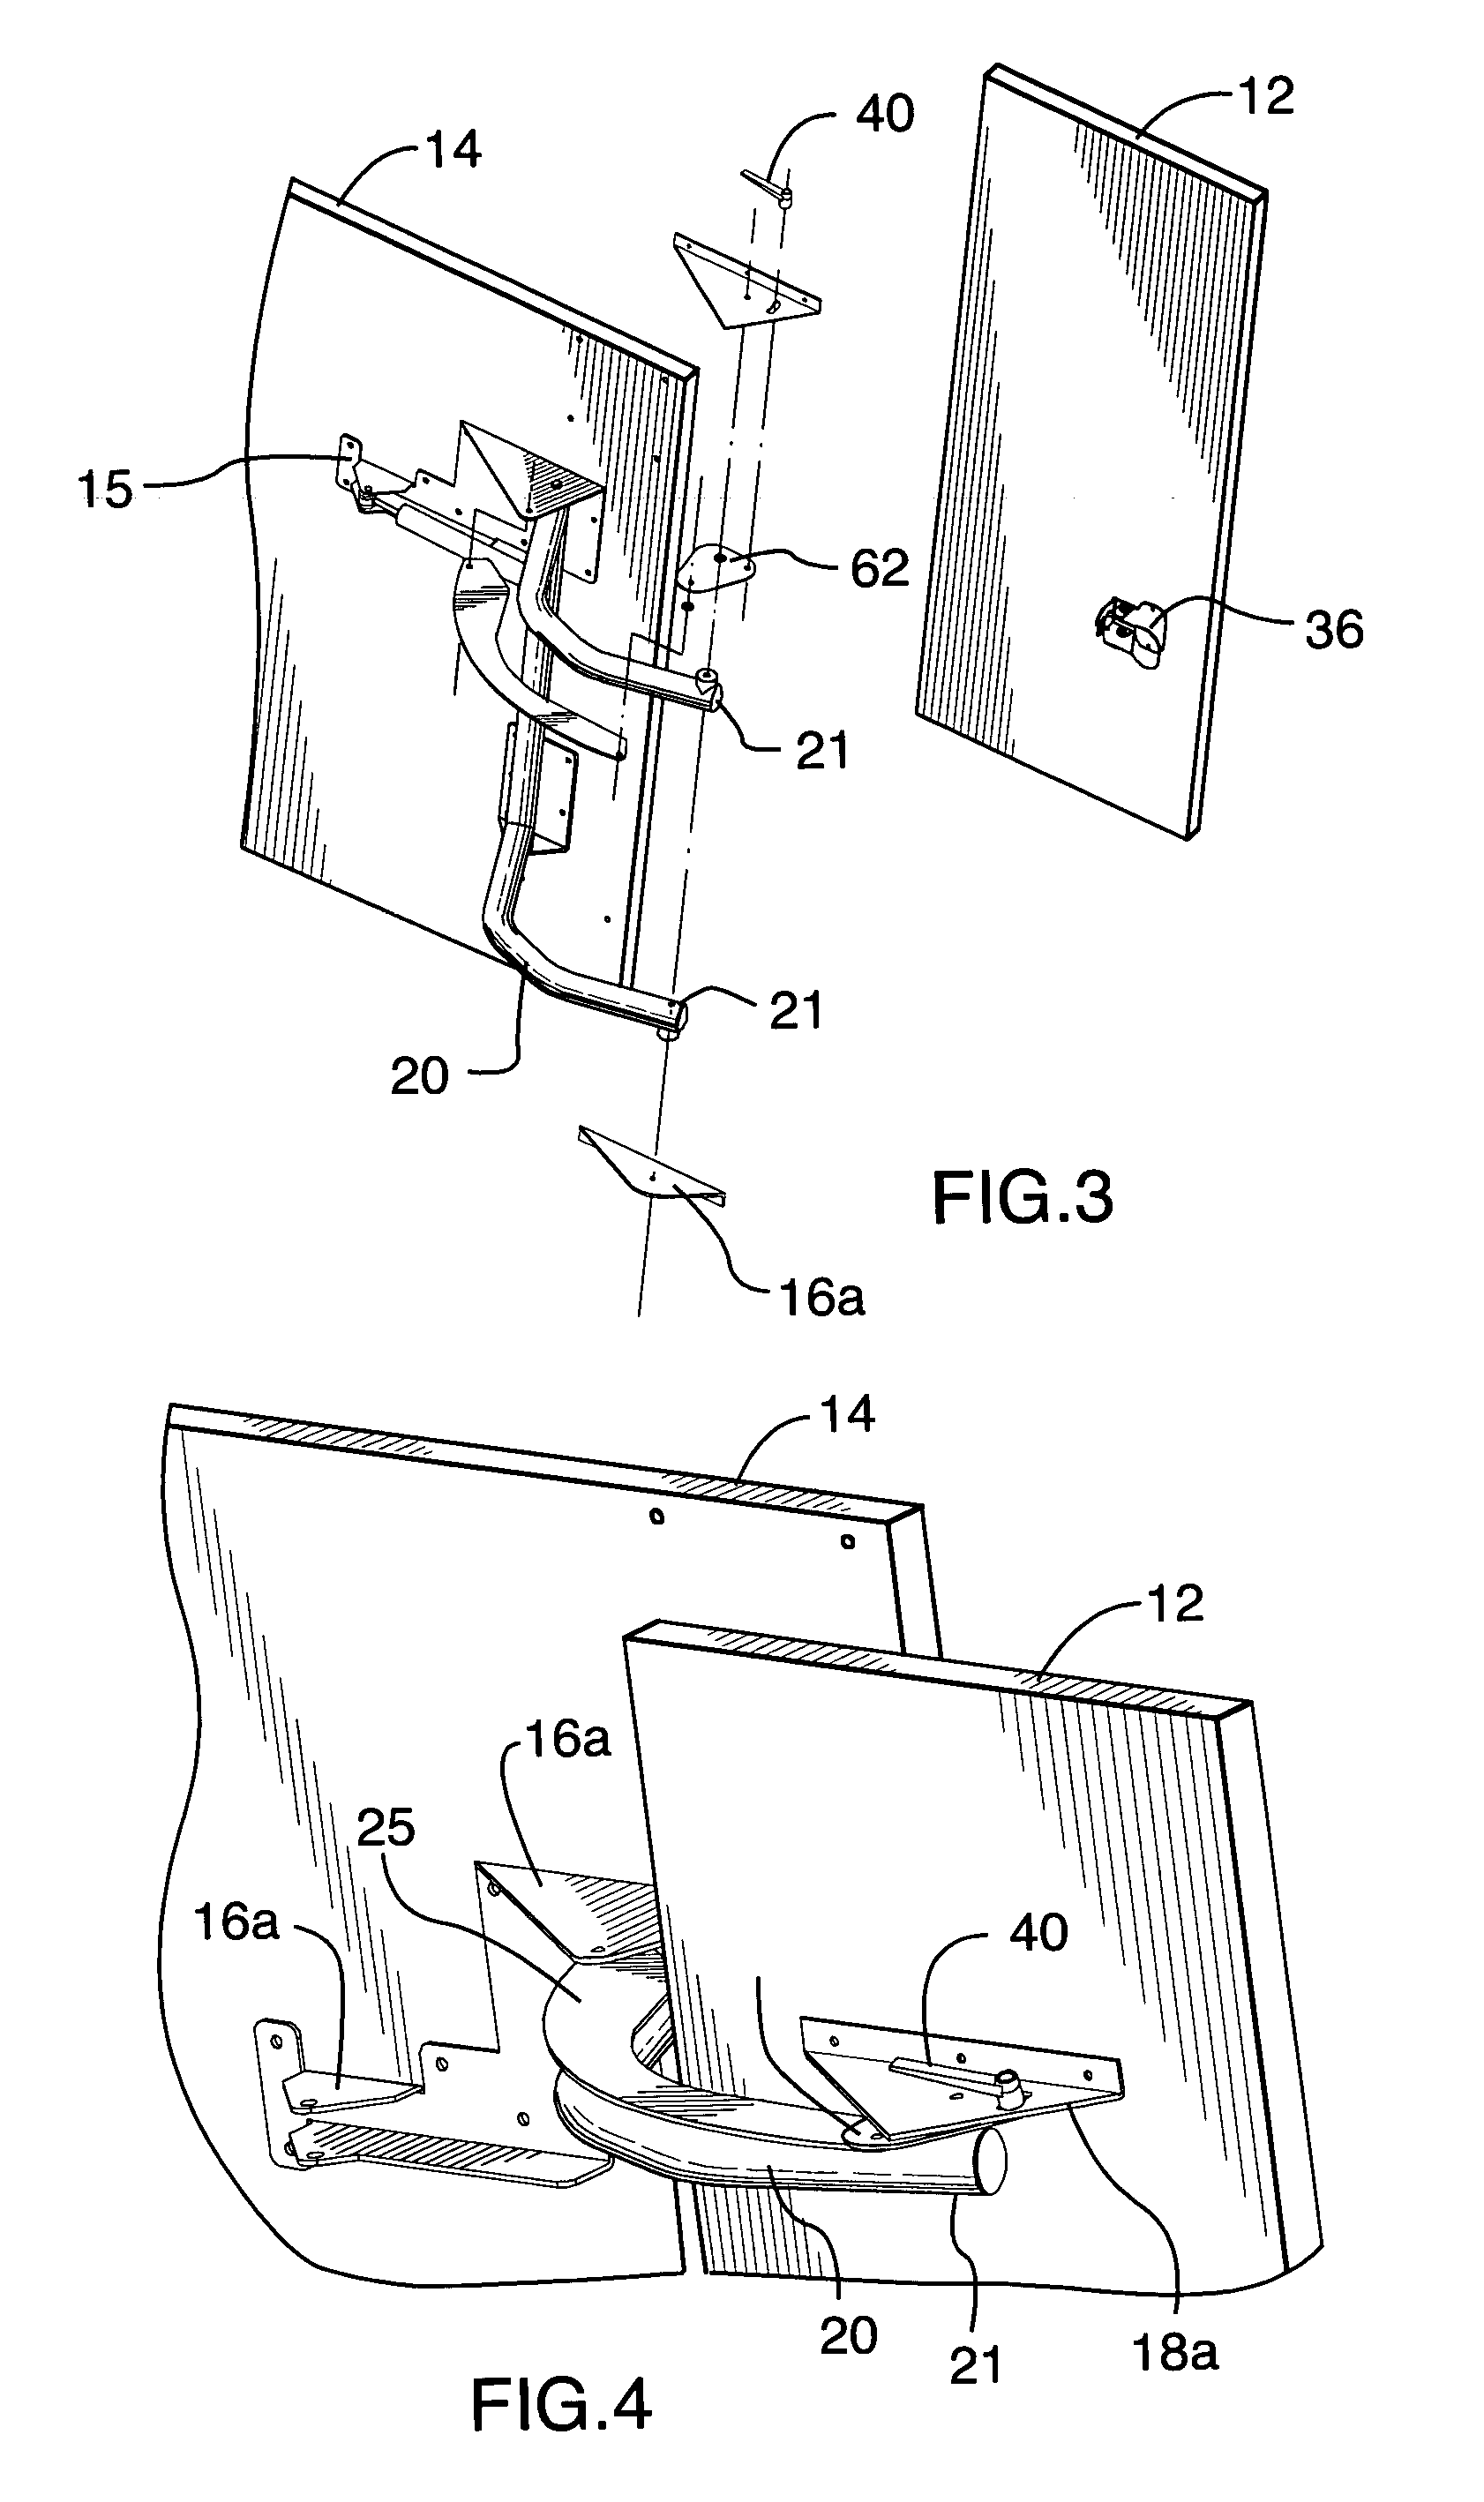 Adjustable work surface support